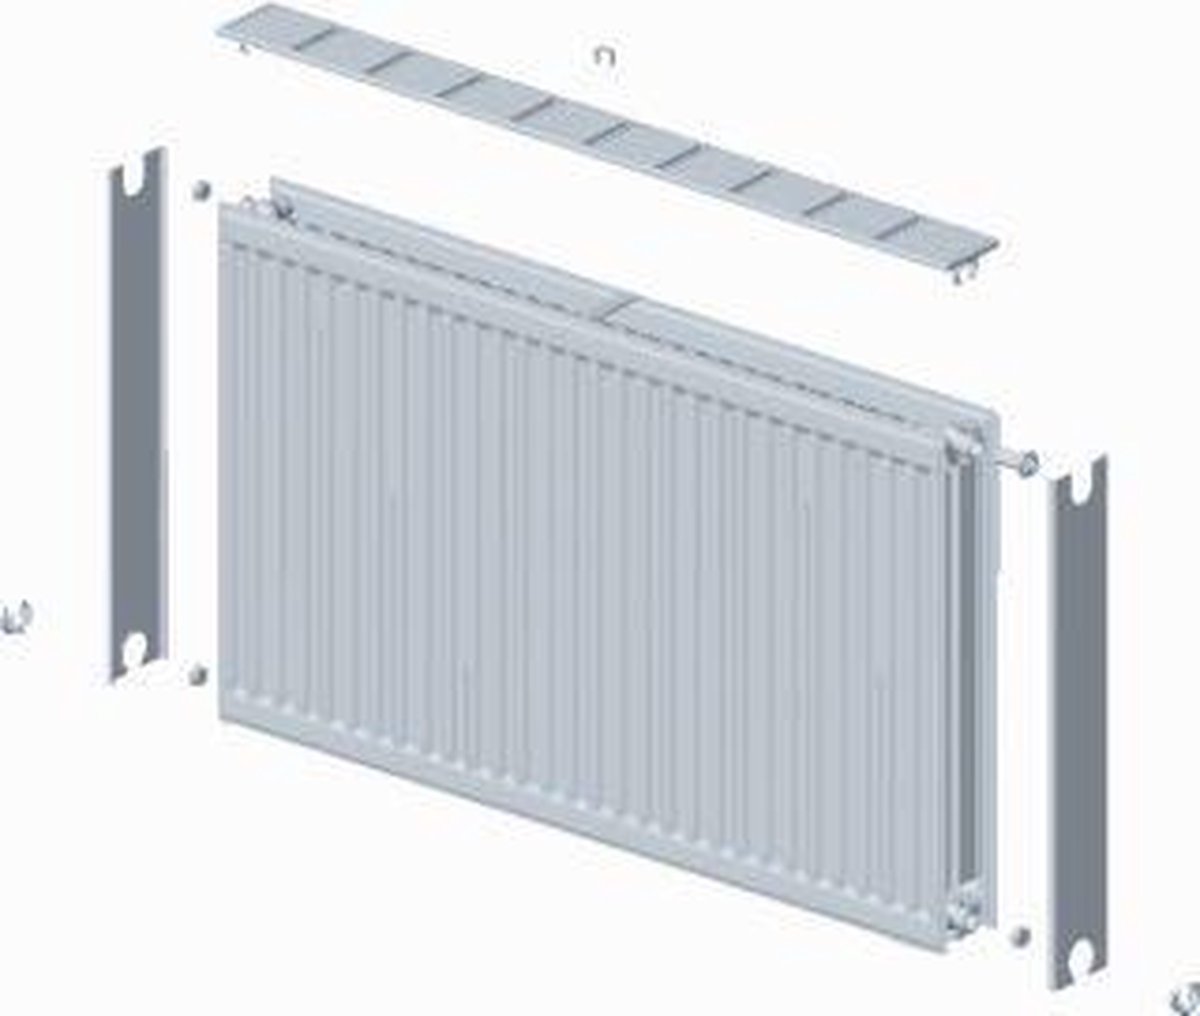 Stelrad paneelradiator Novello, staal, wit, (hxlxd) 500x1600x100mm, 22